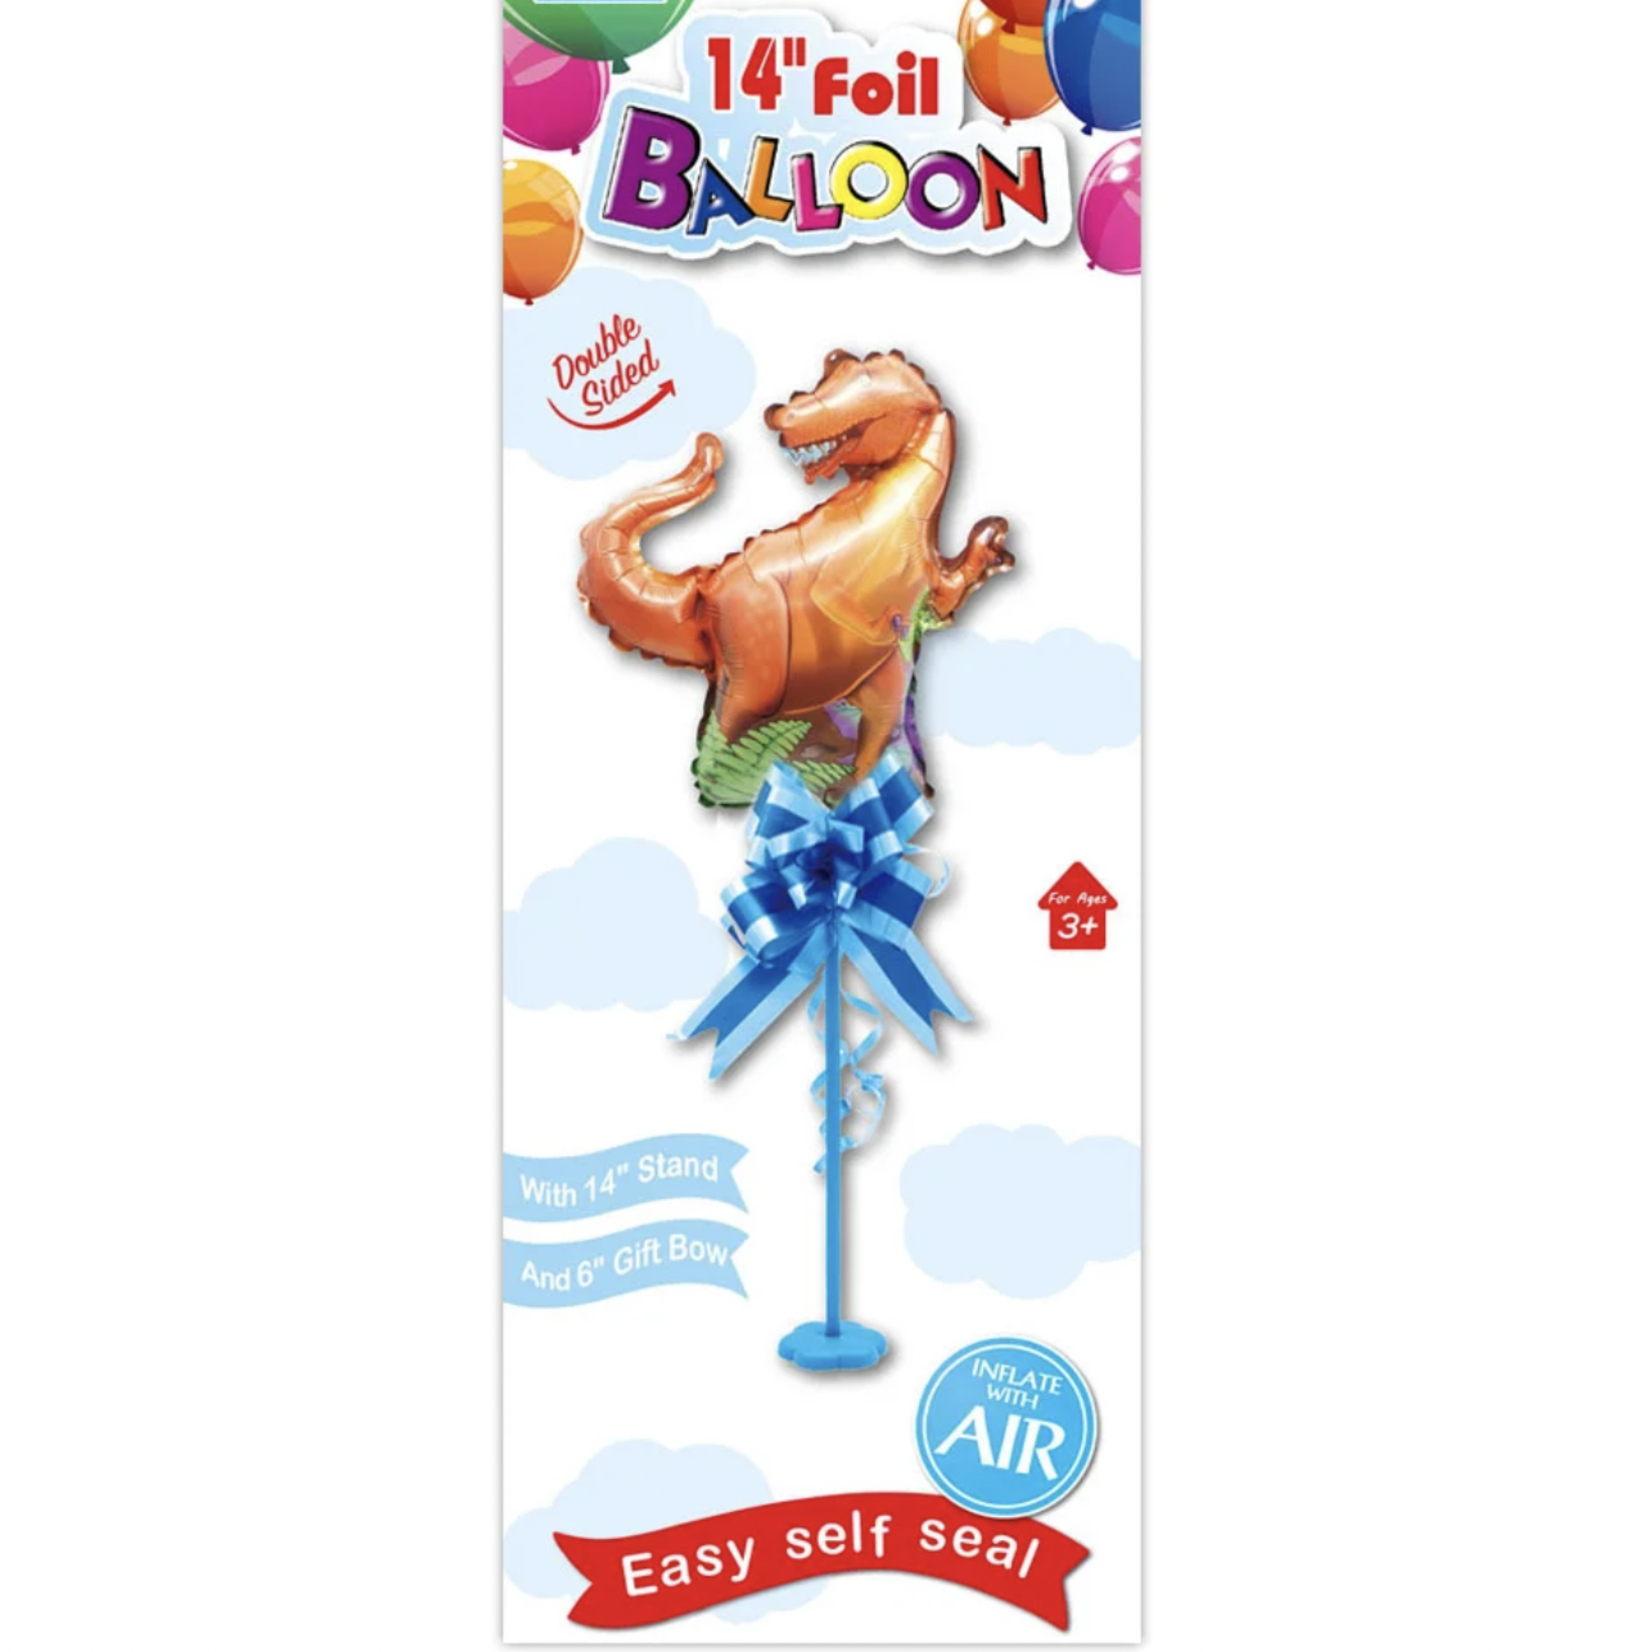 14'' FOIL DINOSAUR BALLOON WITH STAND